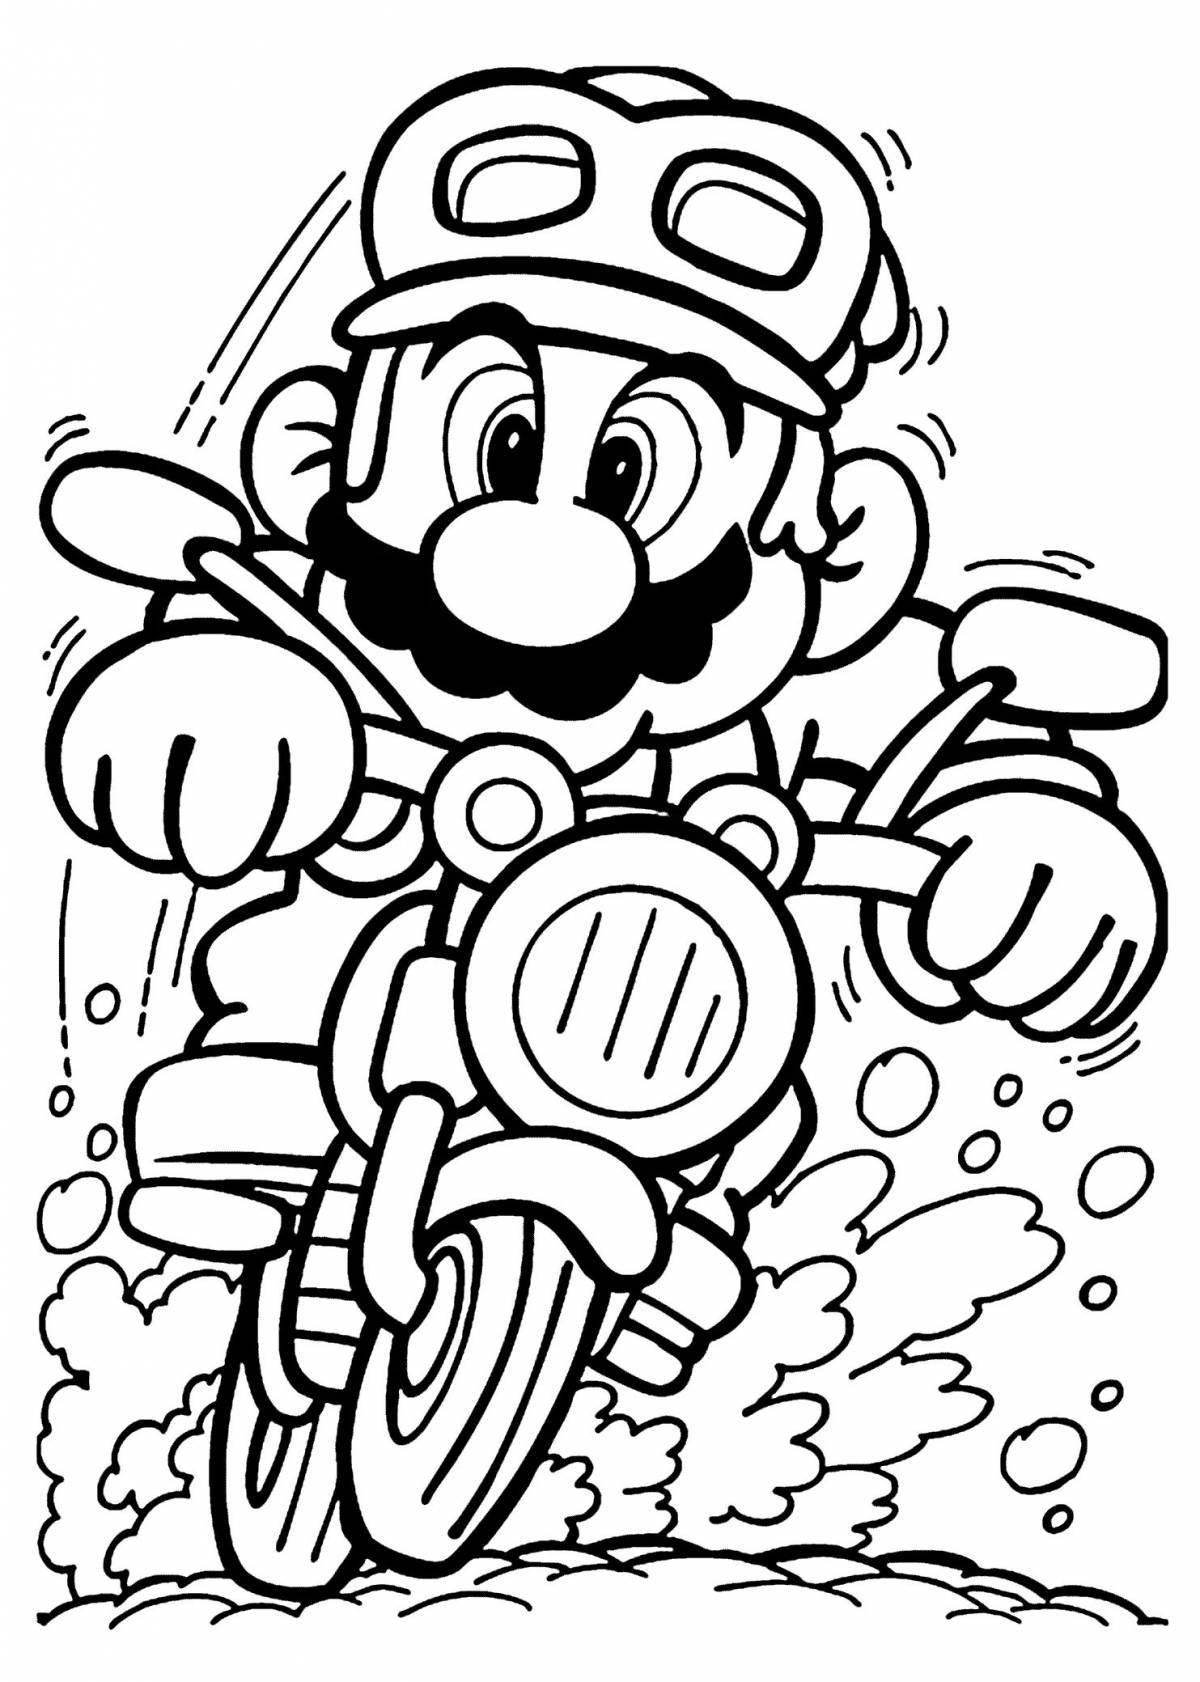 Mario for kids #4